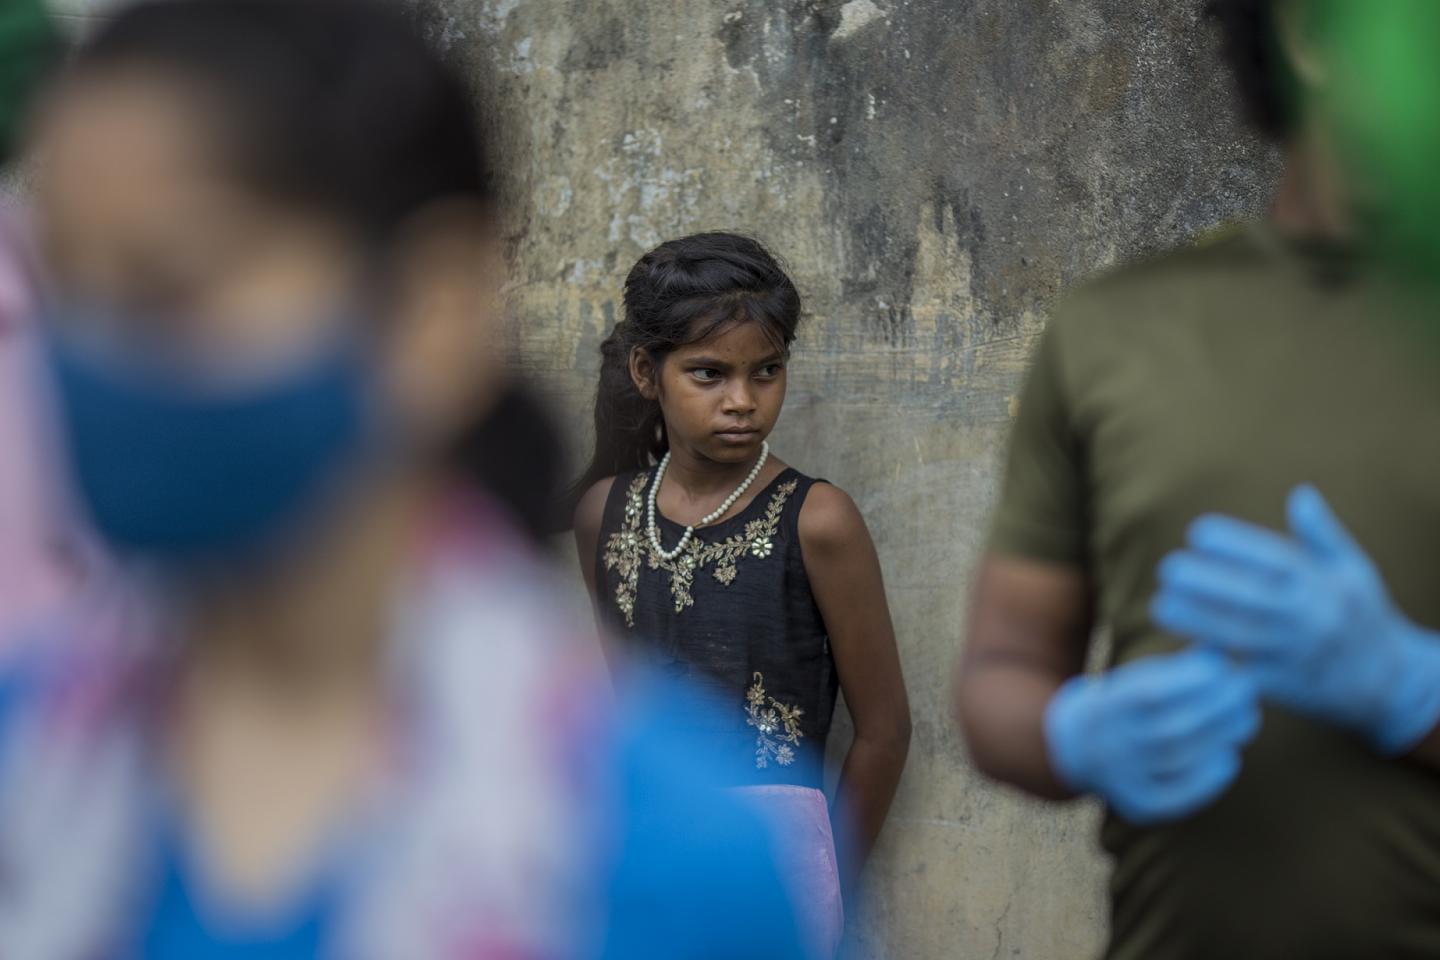 How the COVID-19 pandemic has scarred the world’s children